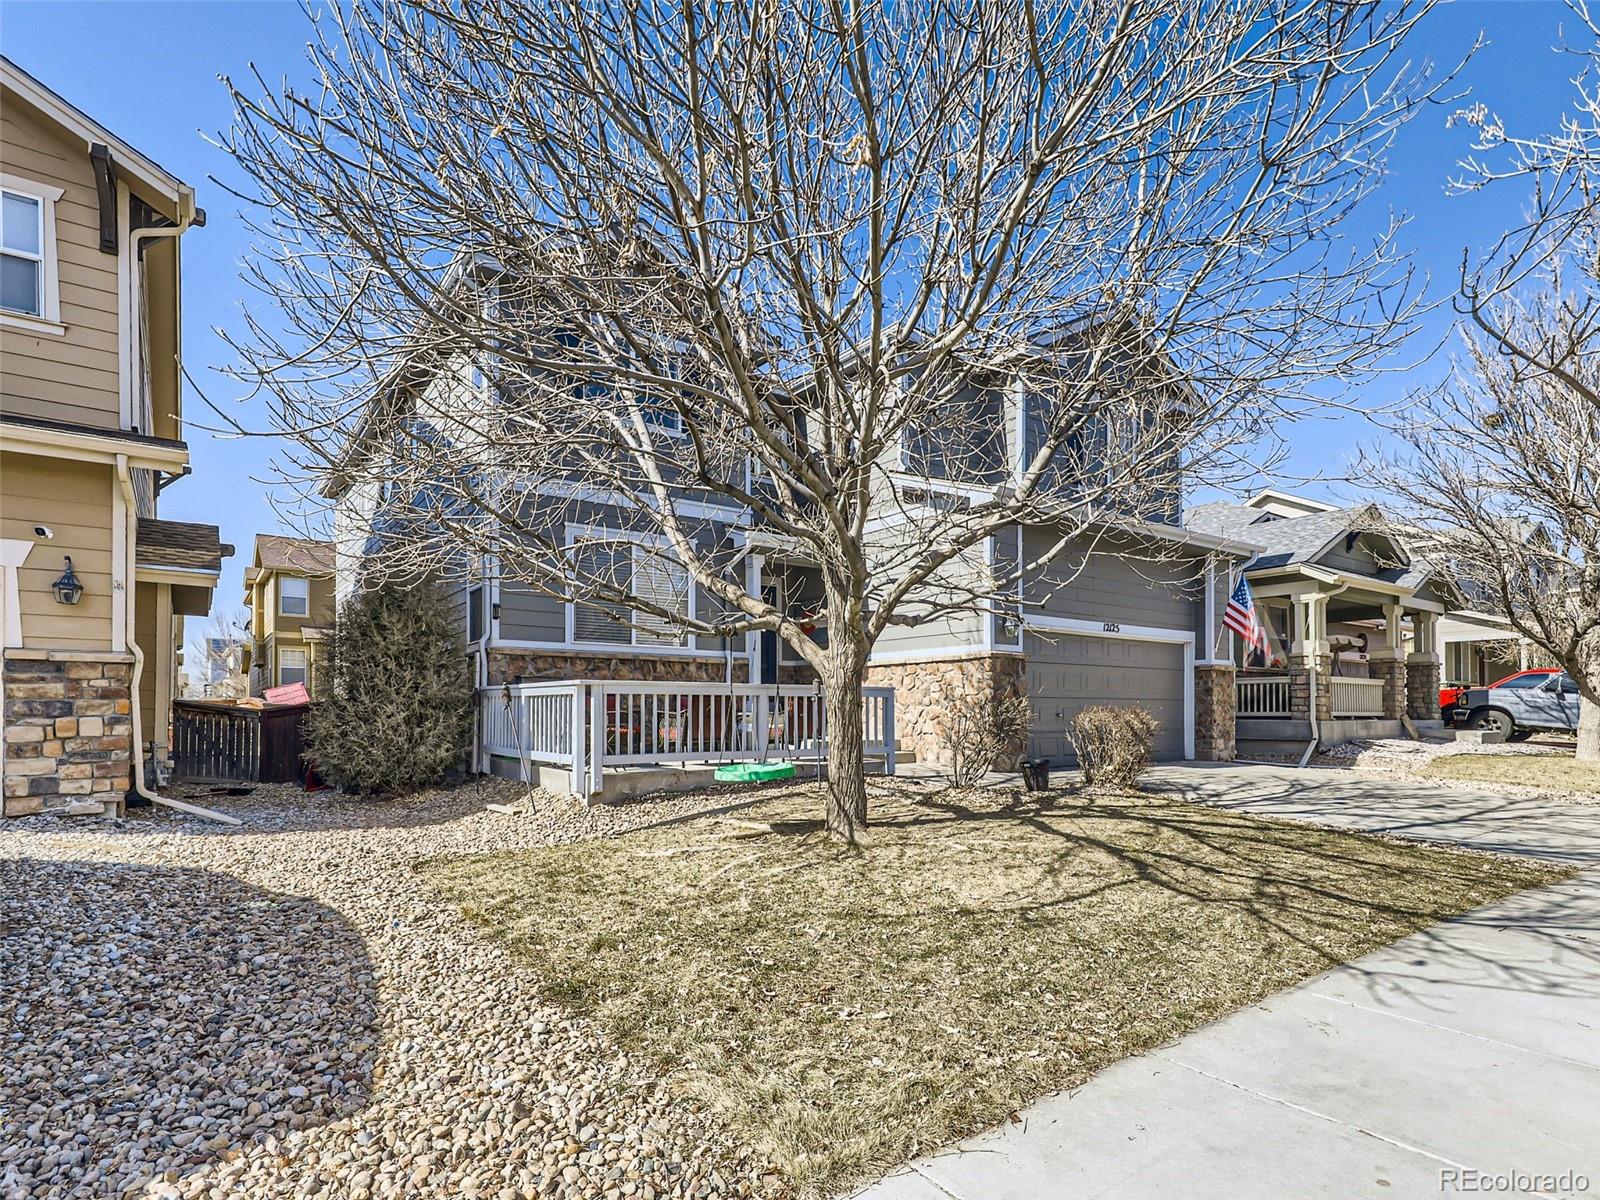 Report Image for 12125  Helena Street,Commerce City, Colorado